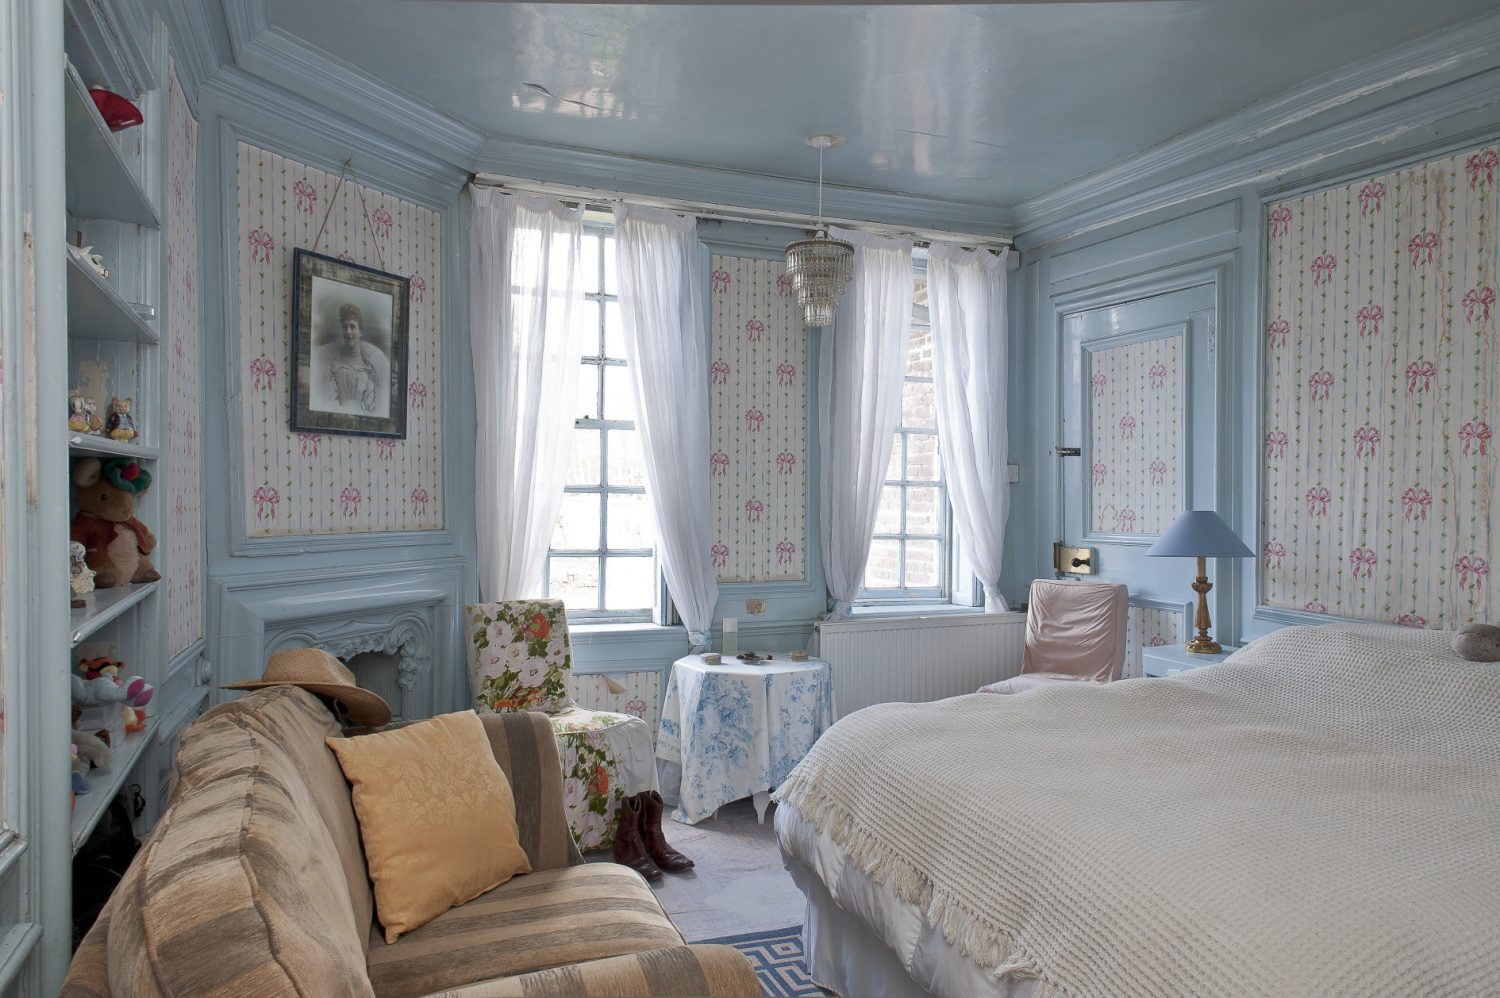 Olga’s old night nursery is an almost perfect capsule of late 19th century interior design, the woodwork on the panelled walls is painted pale powder blue and in between, the wallpaper features tiny yellow rosebuds with pink ribbons running between them